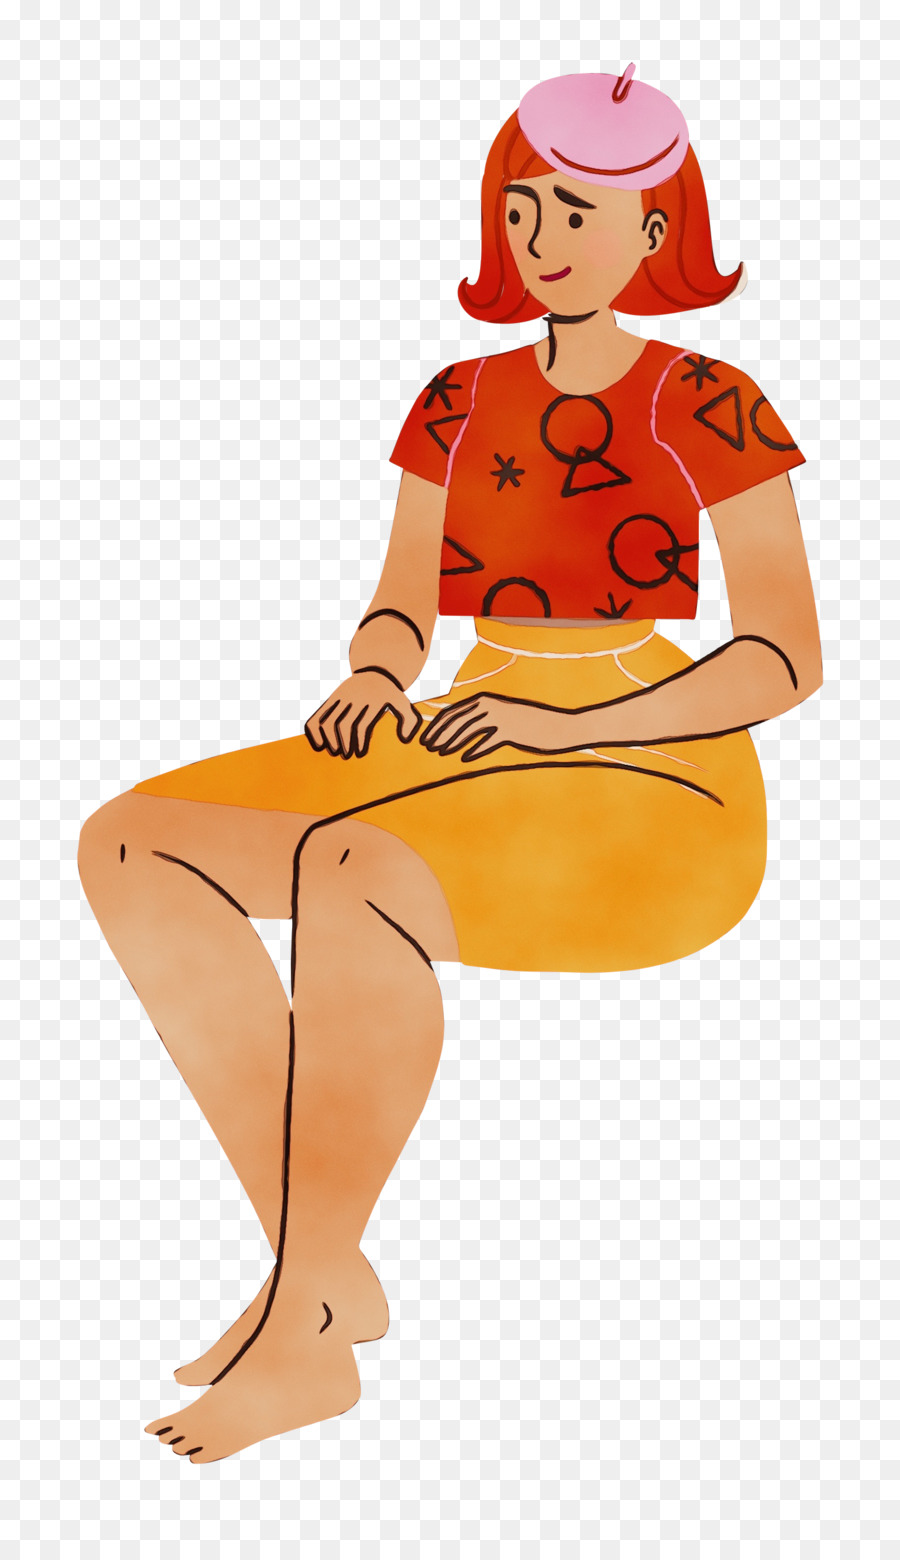 Joint Cartoon Pin-Up Girl Sitting Science - 